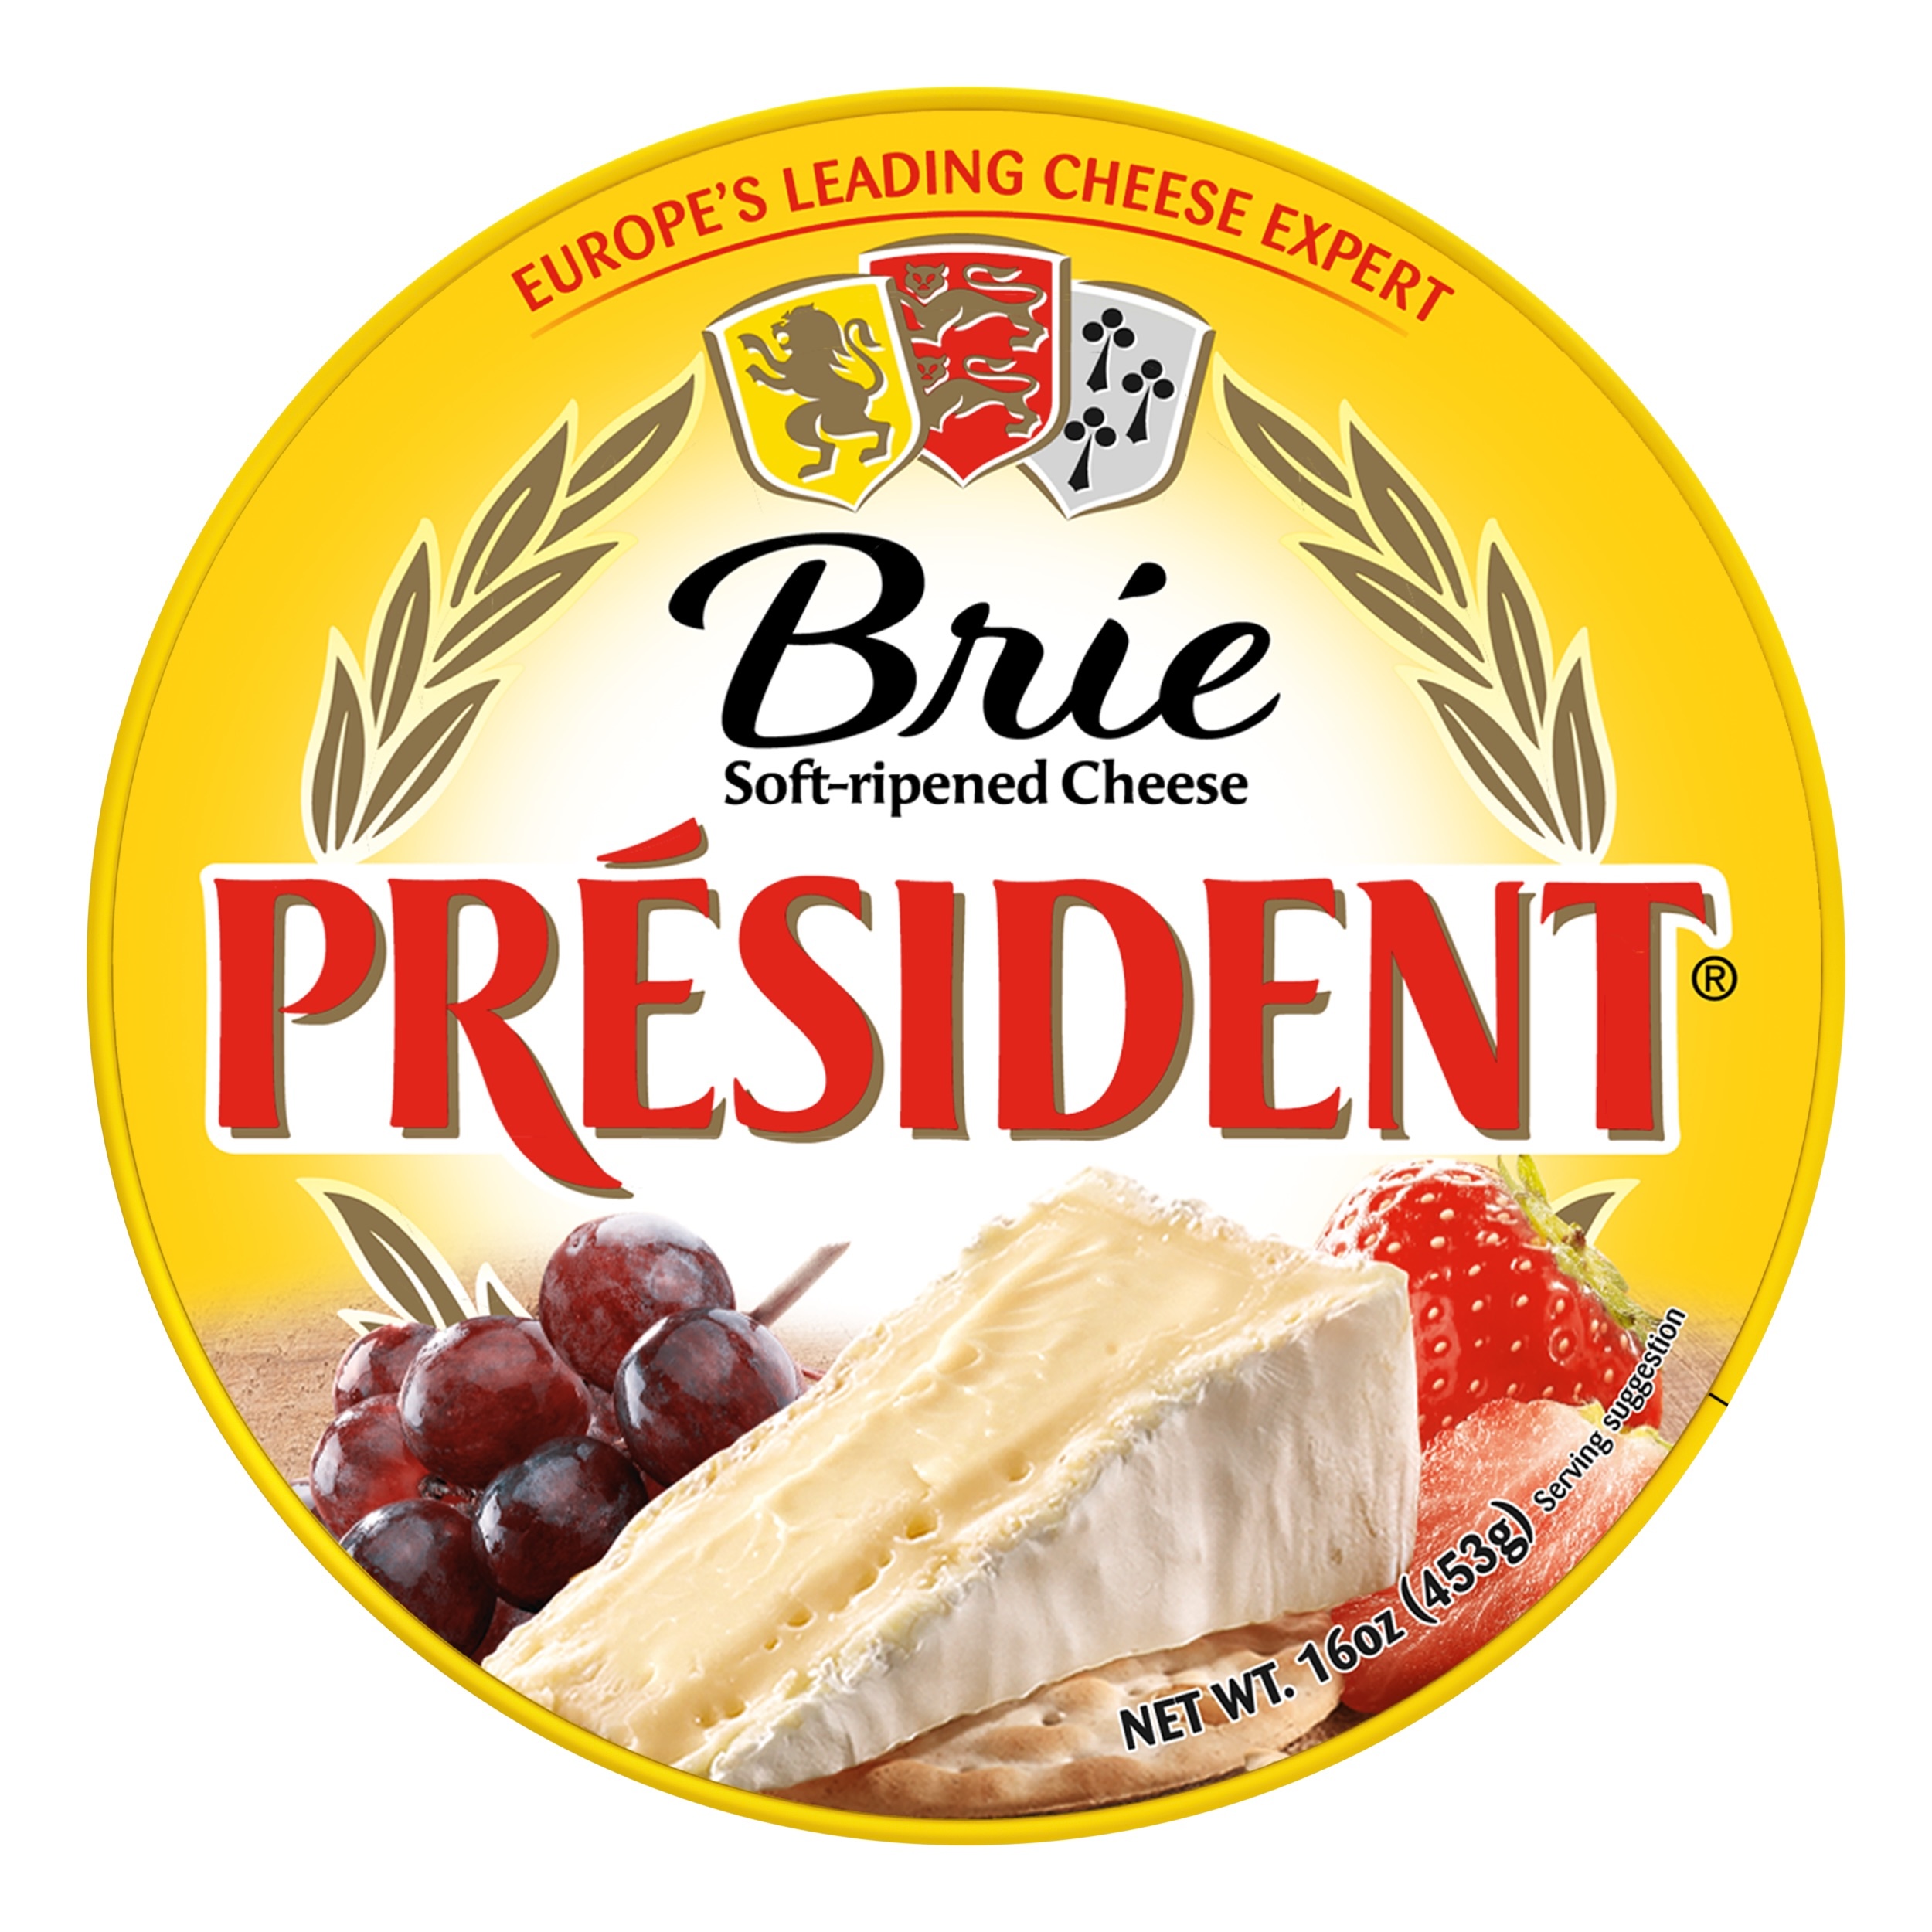 President Brie Soft-Ripened Cheese, 16 oz (Refrigerated) - image 1 of 10